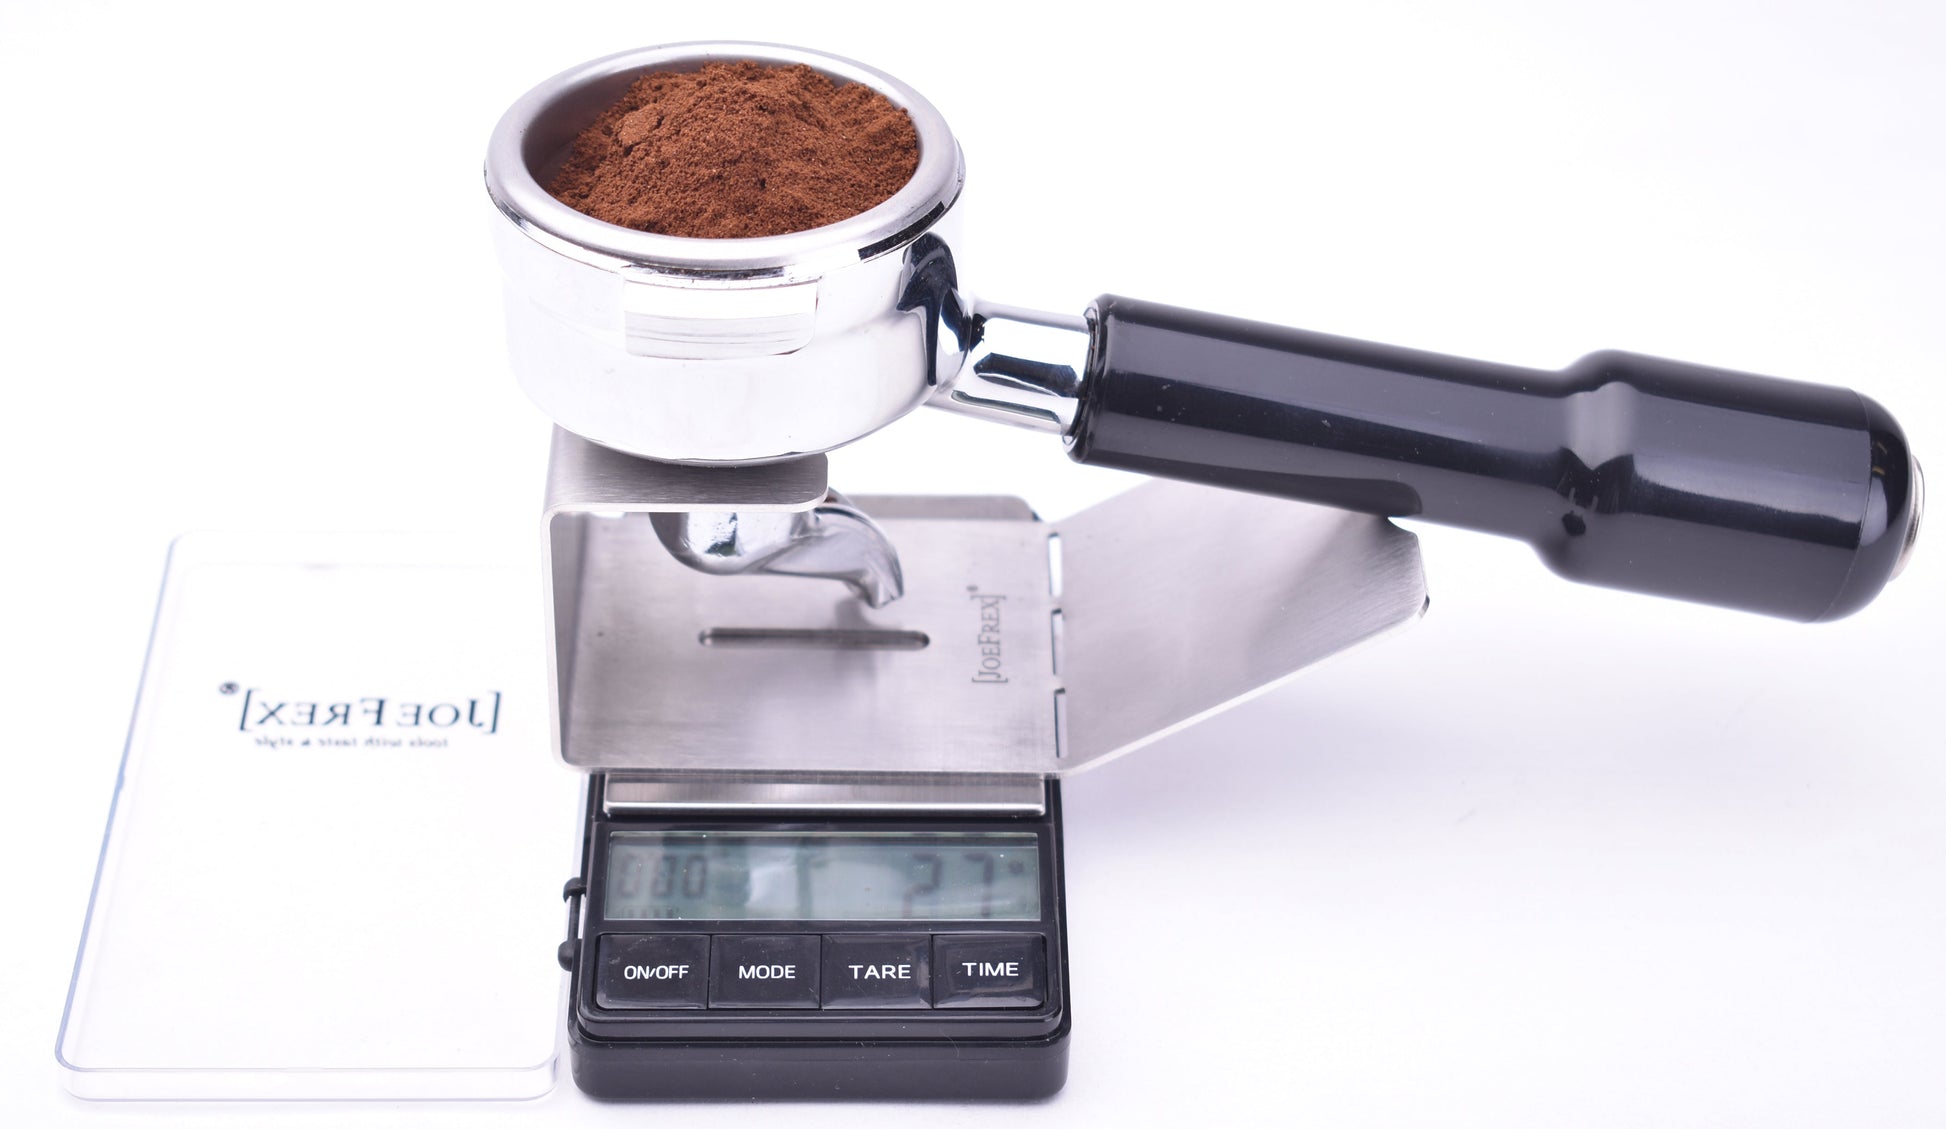 Portafilter Stand Stainless Steel for weighing coffee